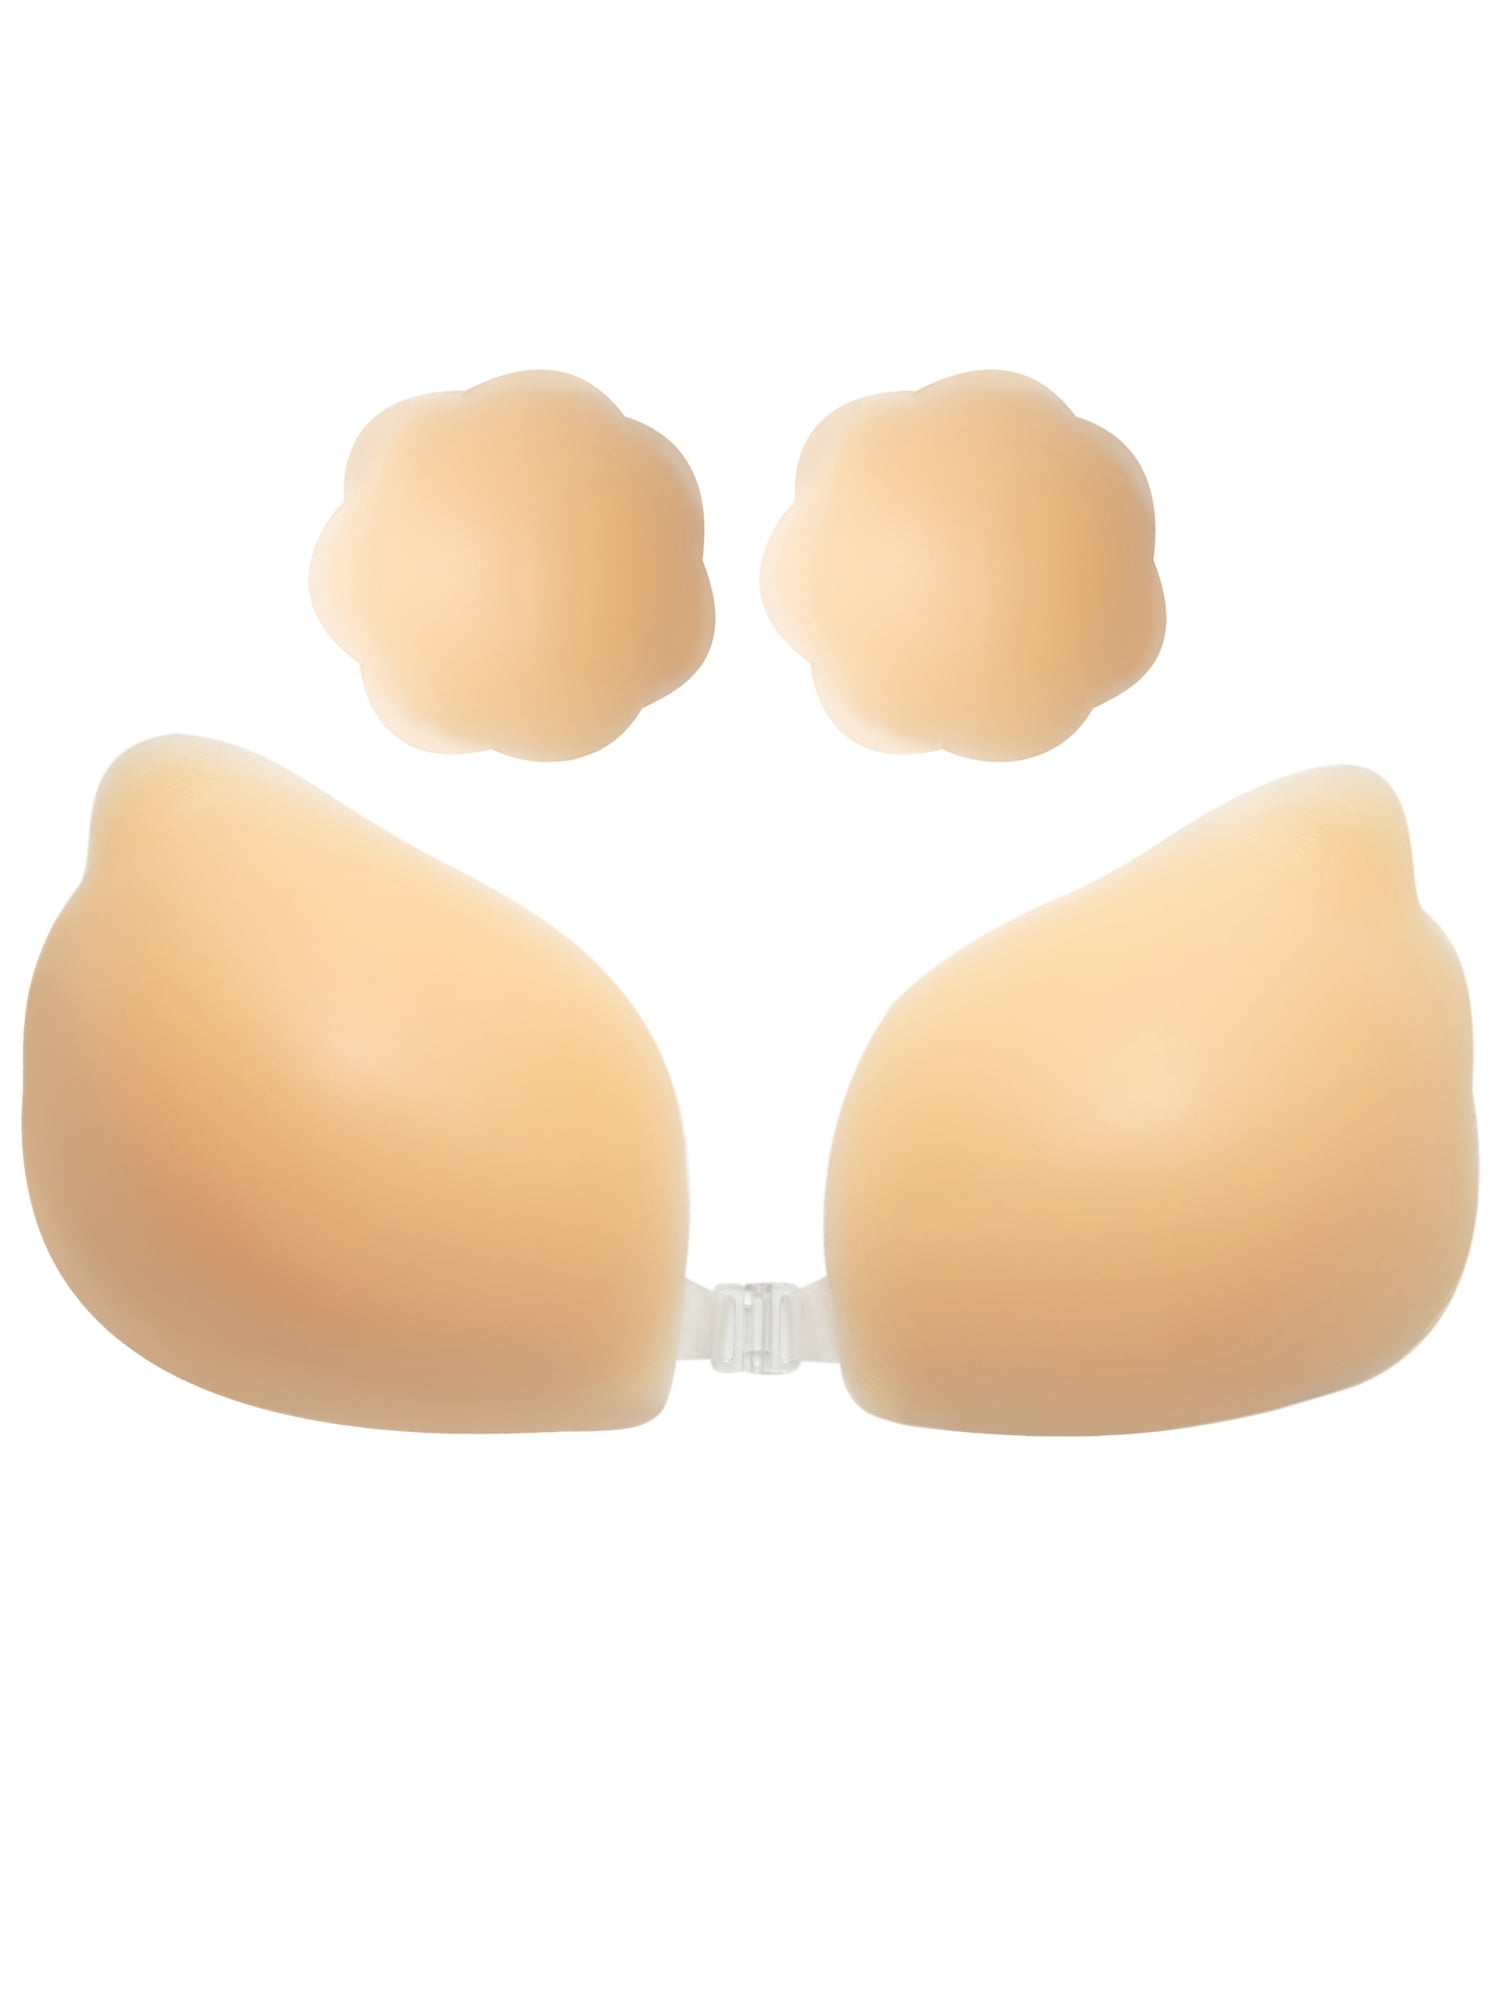 UK Women Invisible Silicone Breast Boob Lift Up Tape 2 Wings Bra Nipple Cover